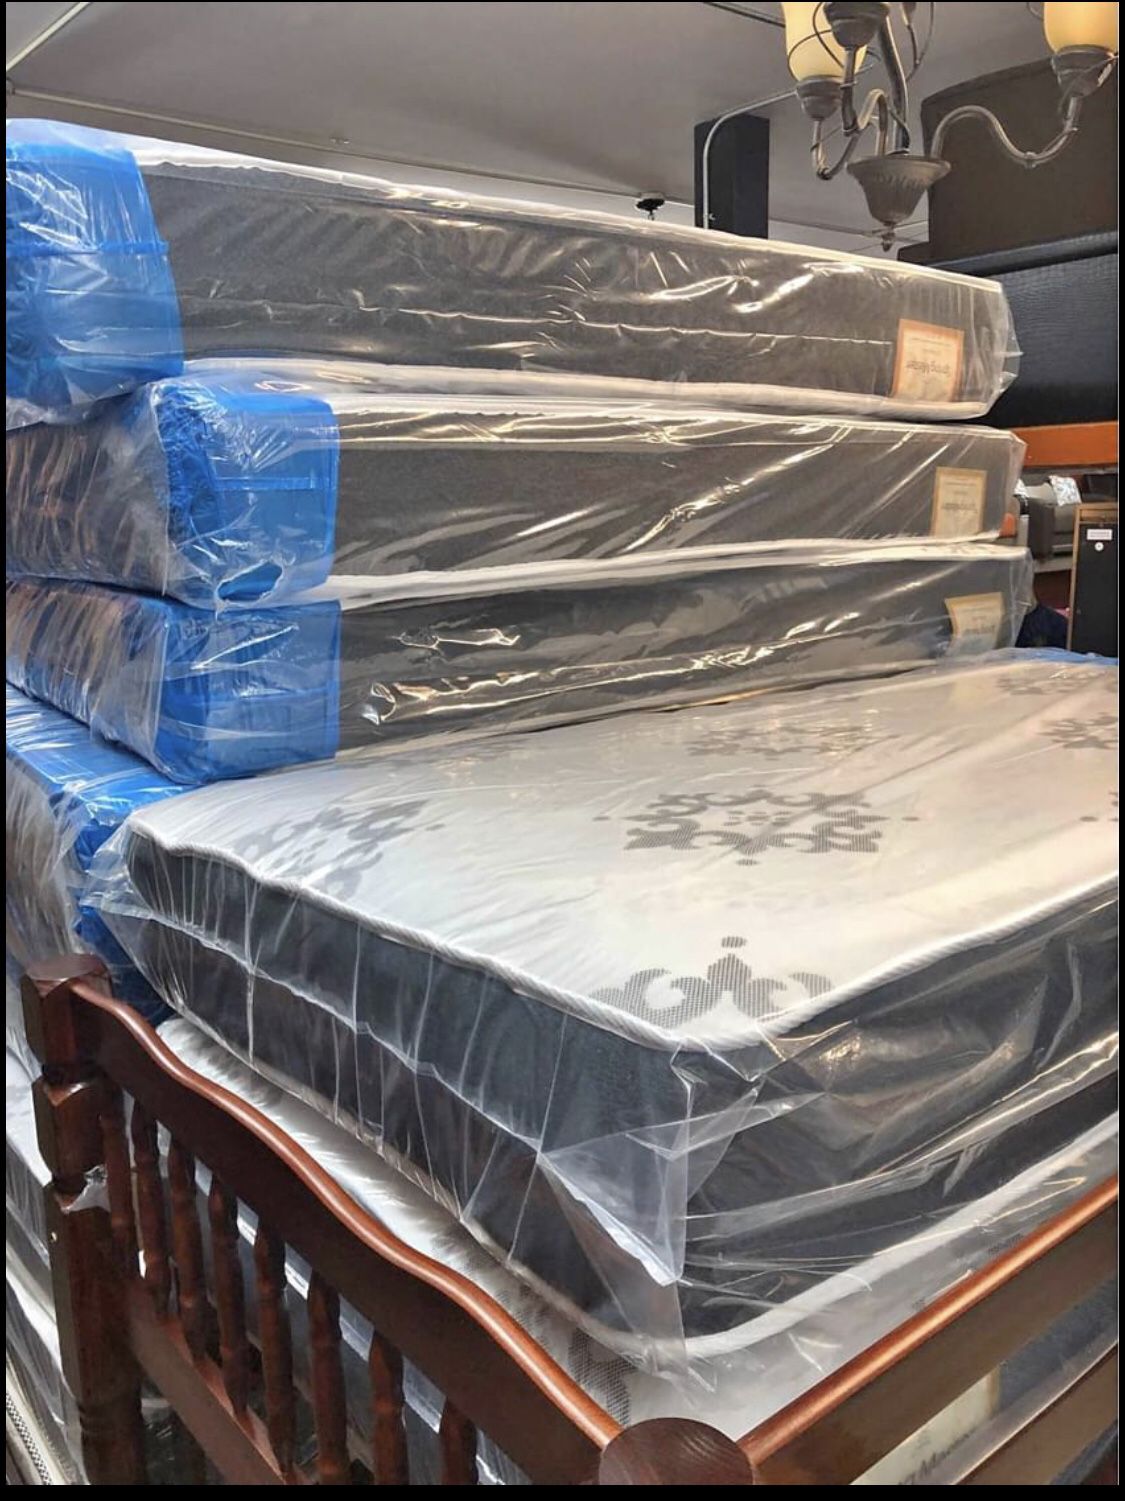 New Queen mattress and boxspring available on all sizes! We delivered 